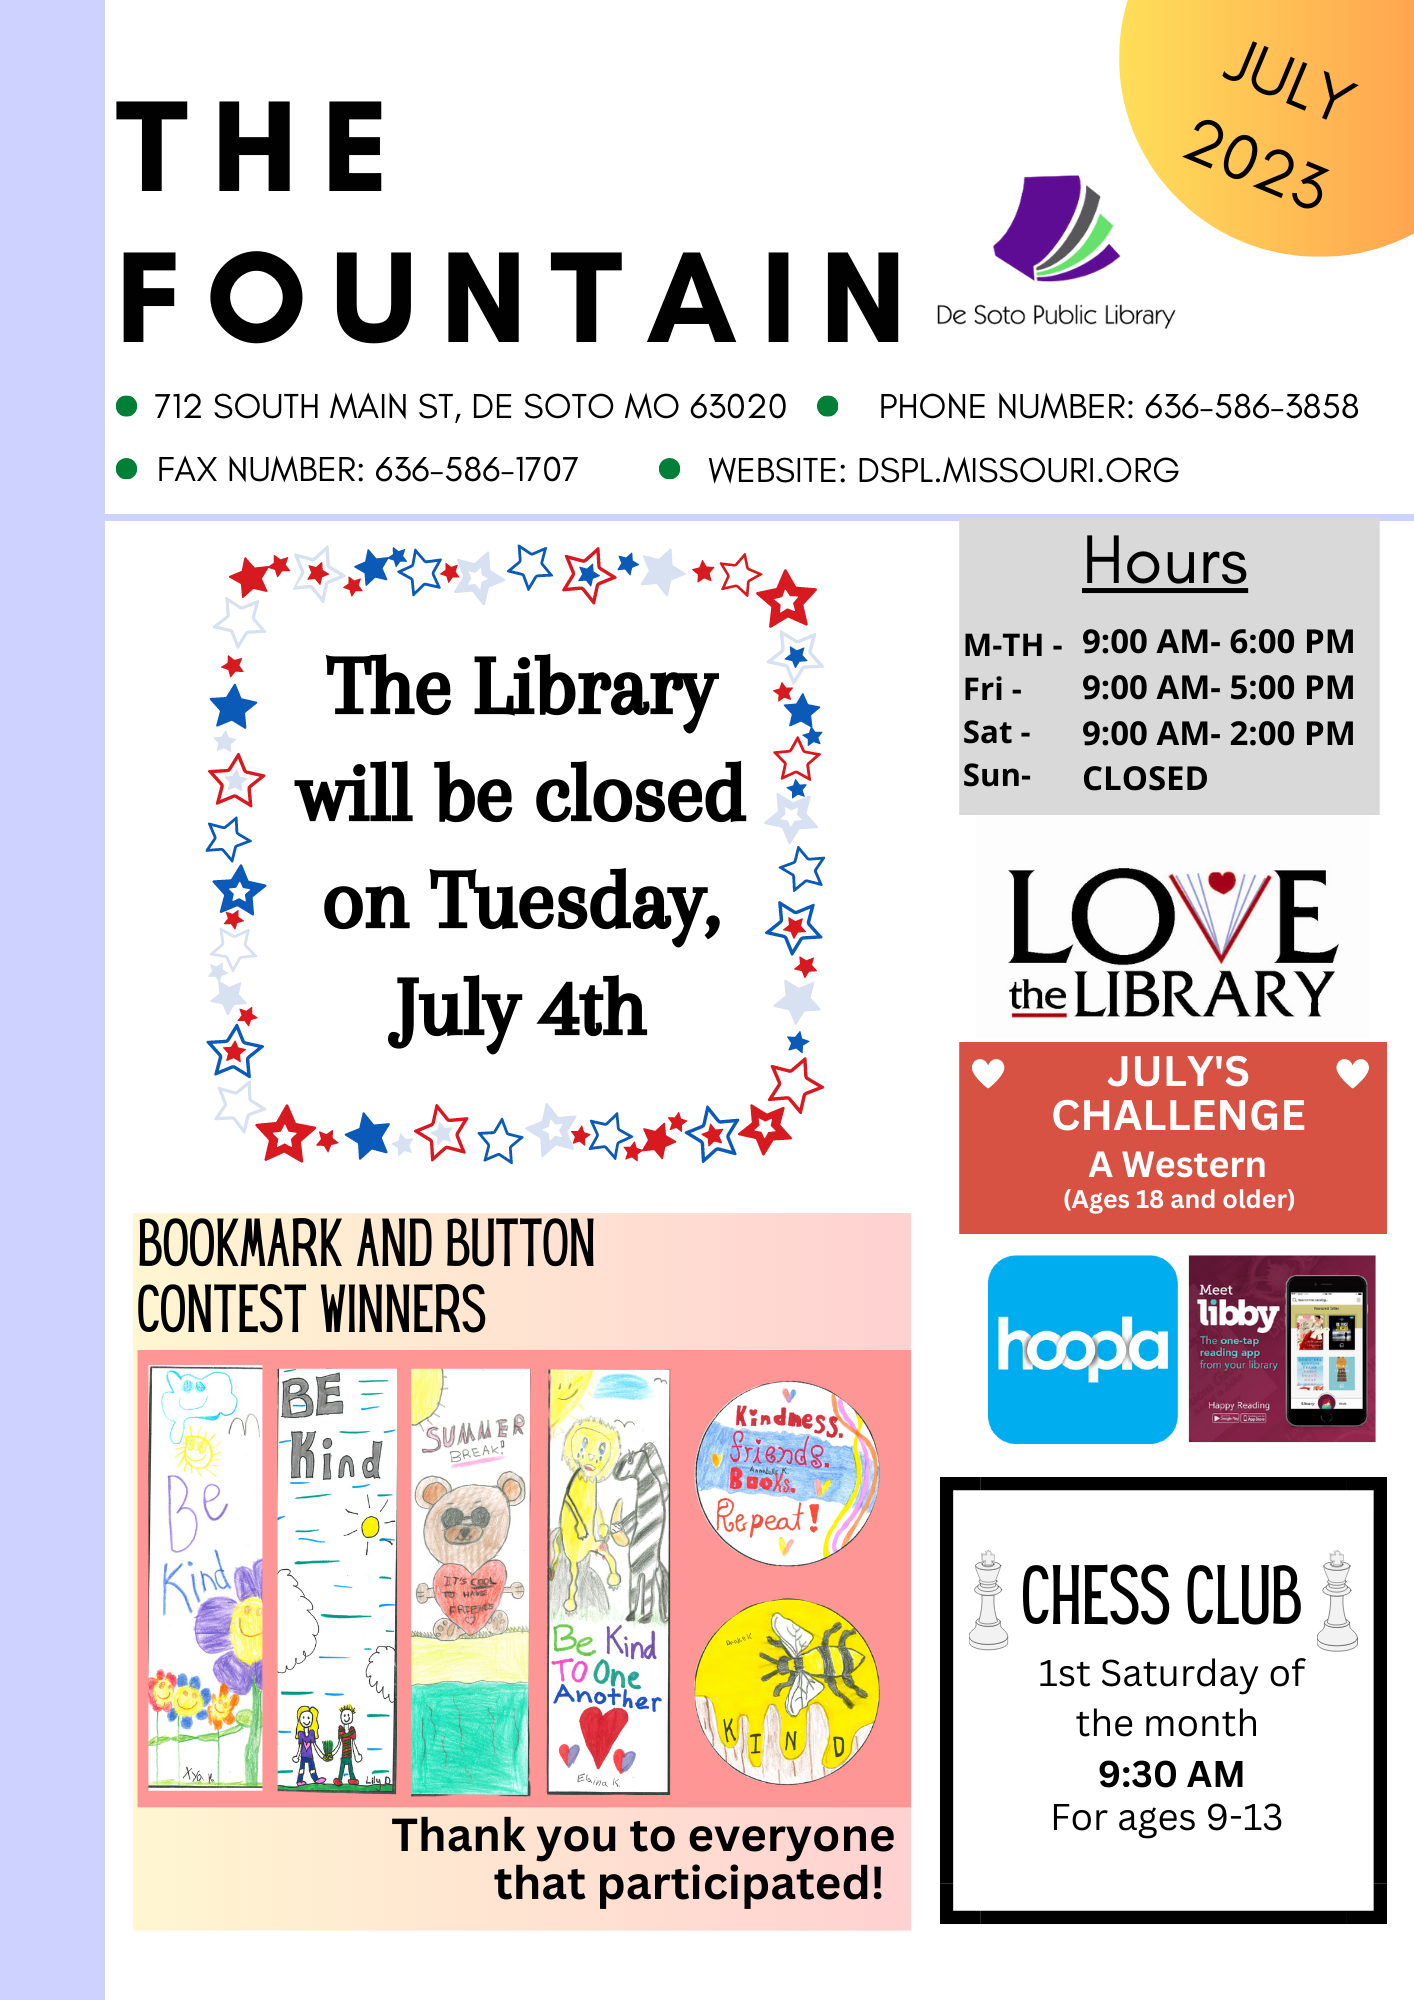 The Fountain July 2023 - Page 1.png